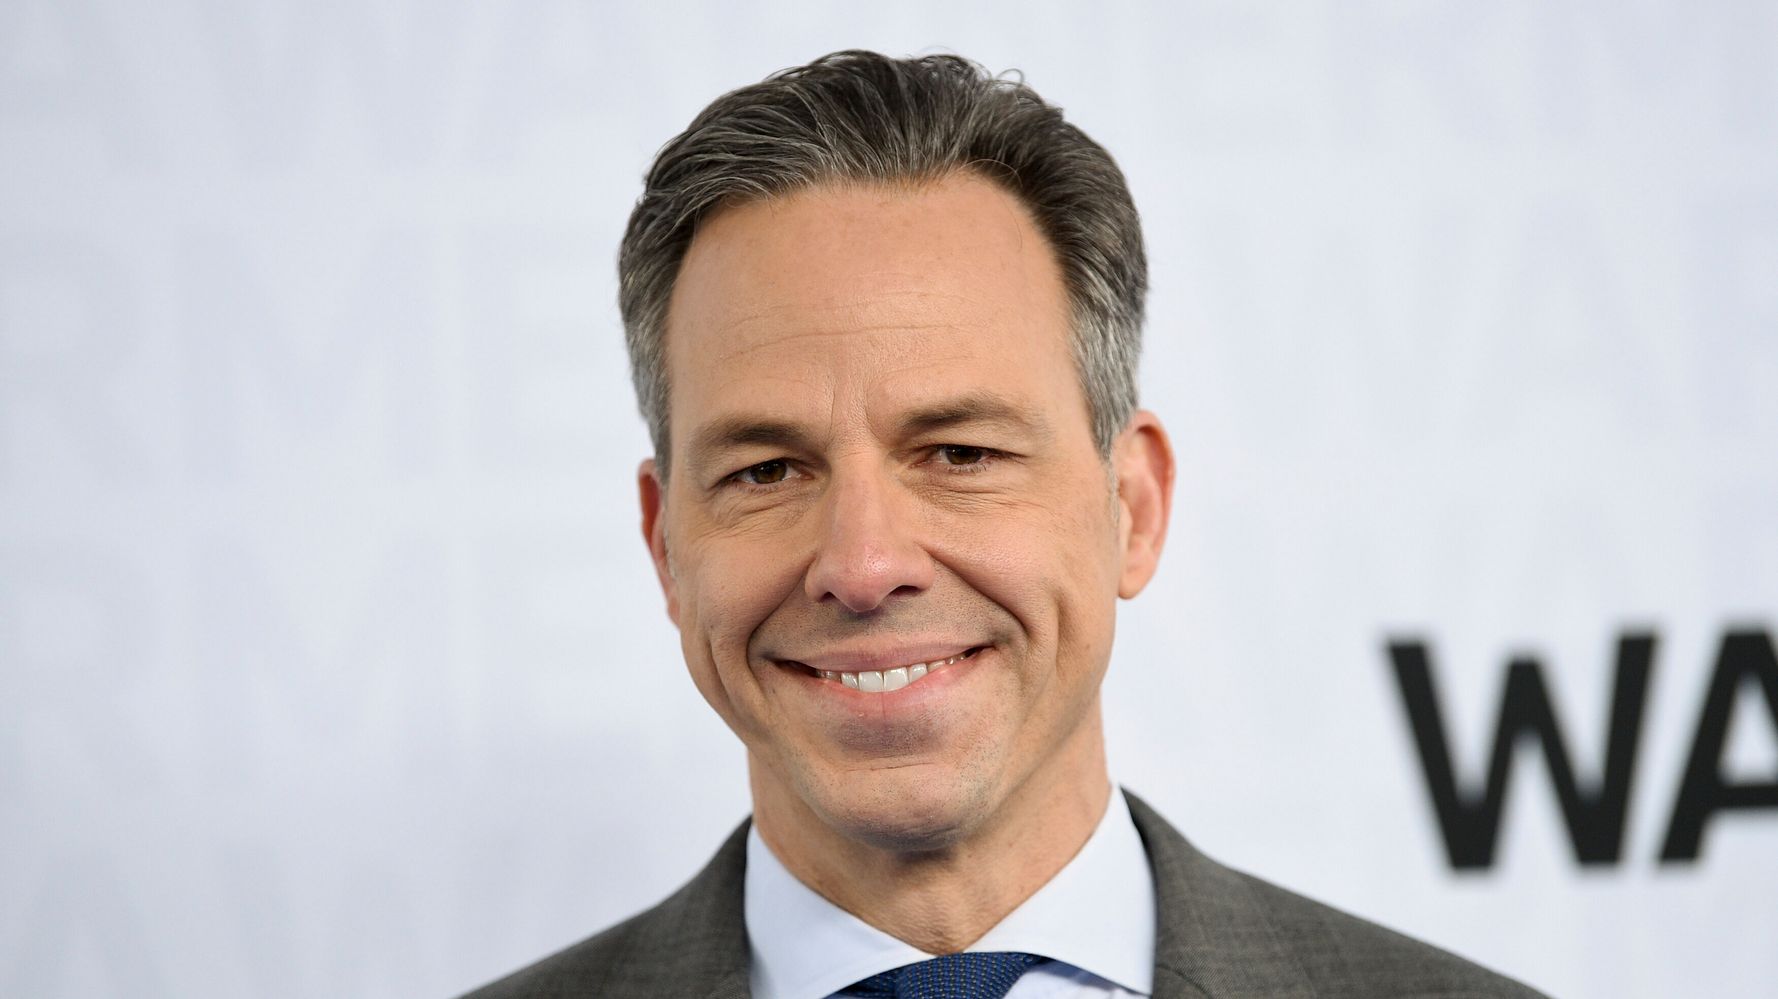 Jake Tapper Reportedly Taped Show At CNN Studio After Testing Positive For COVID-19